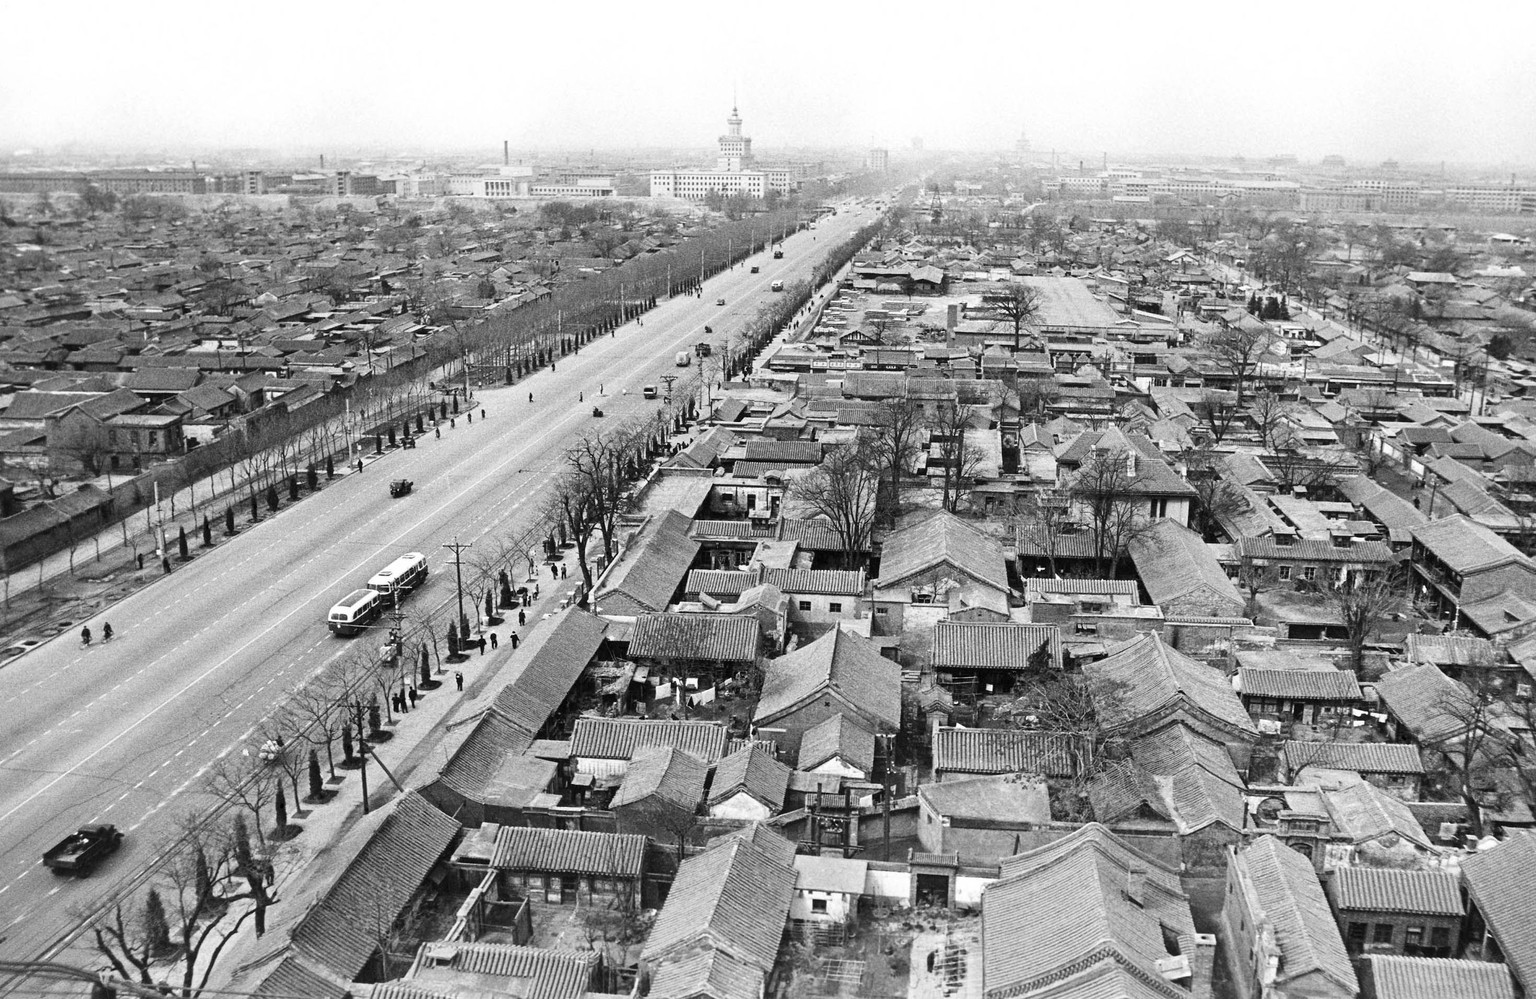 Main Street in Peking (Beijing) with older type housing estates on the right. Note absence of traffic, May 11, 1966. (AP Photo)